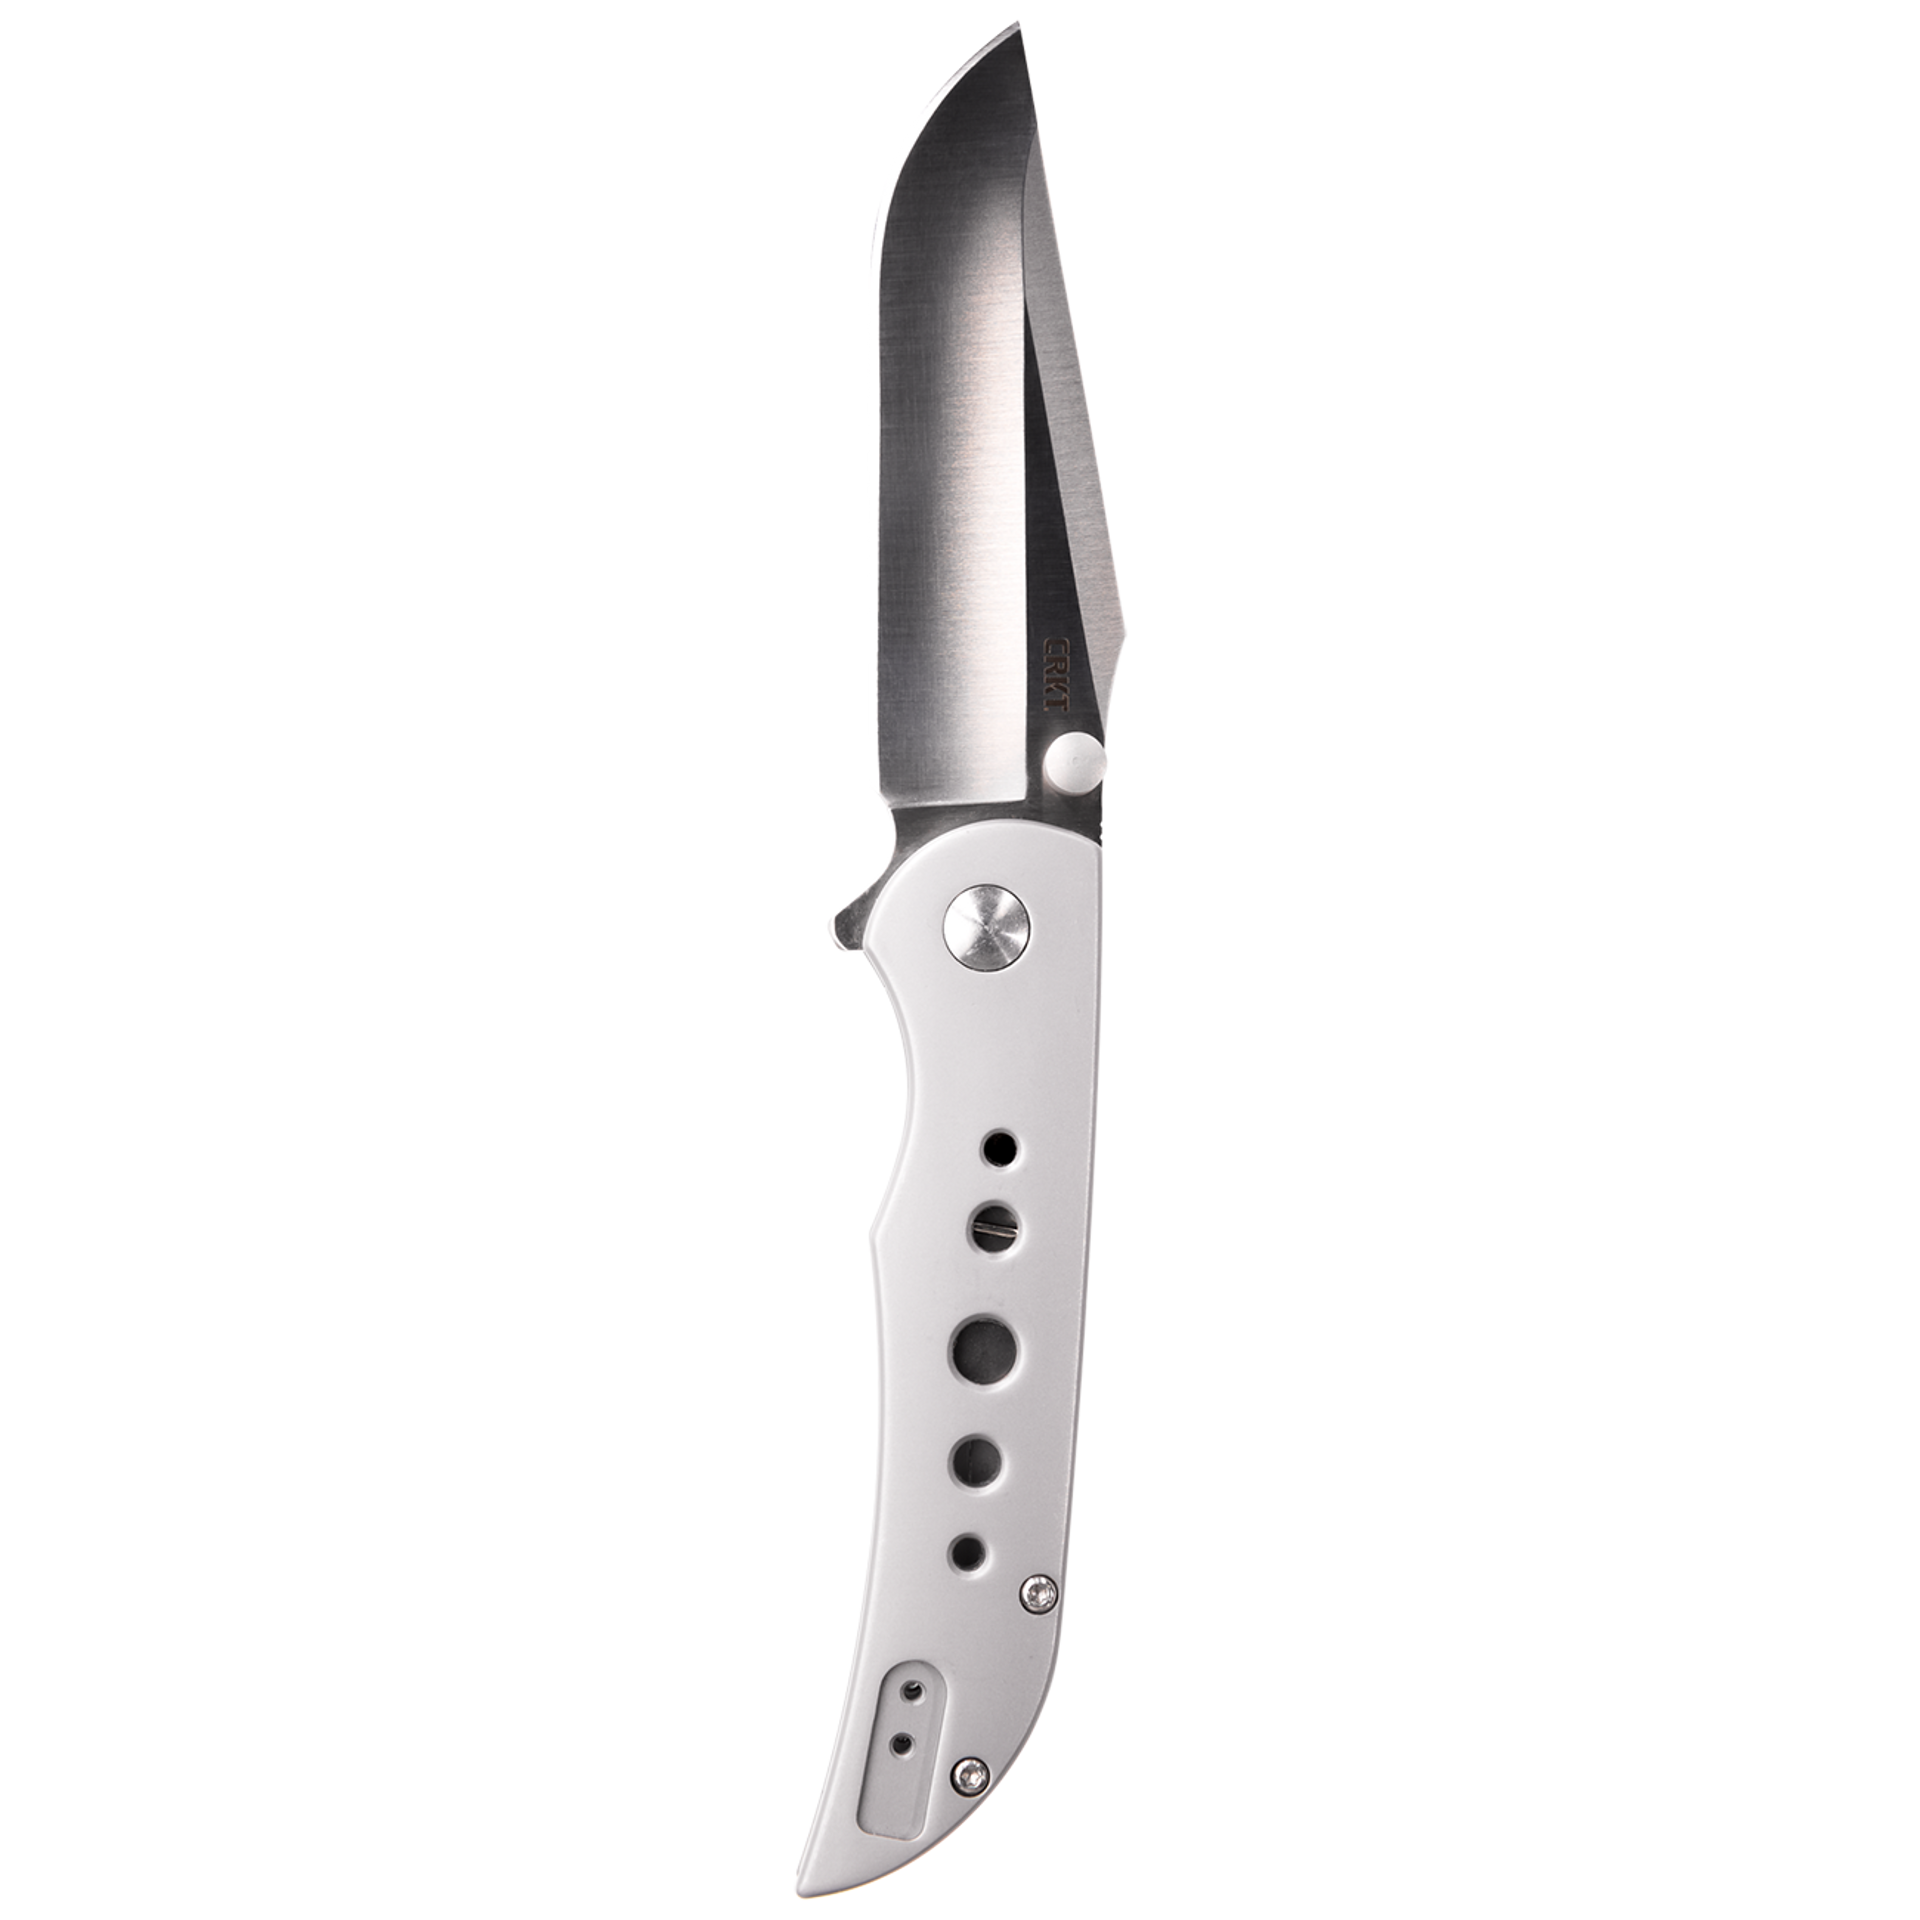 Oxcart Assisted Knife